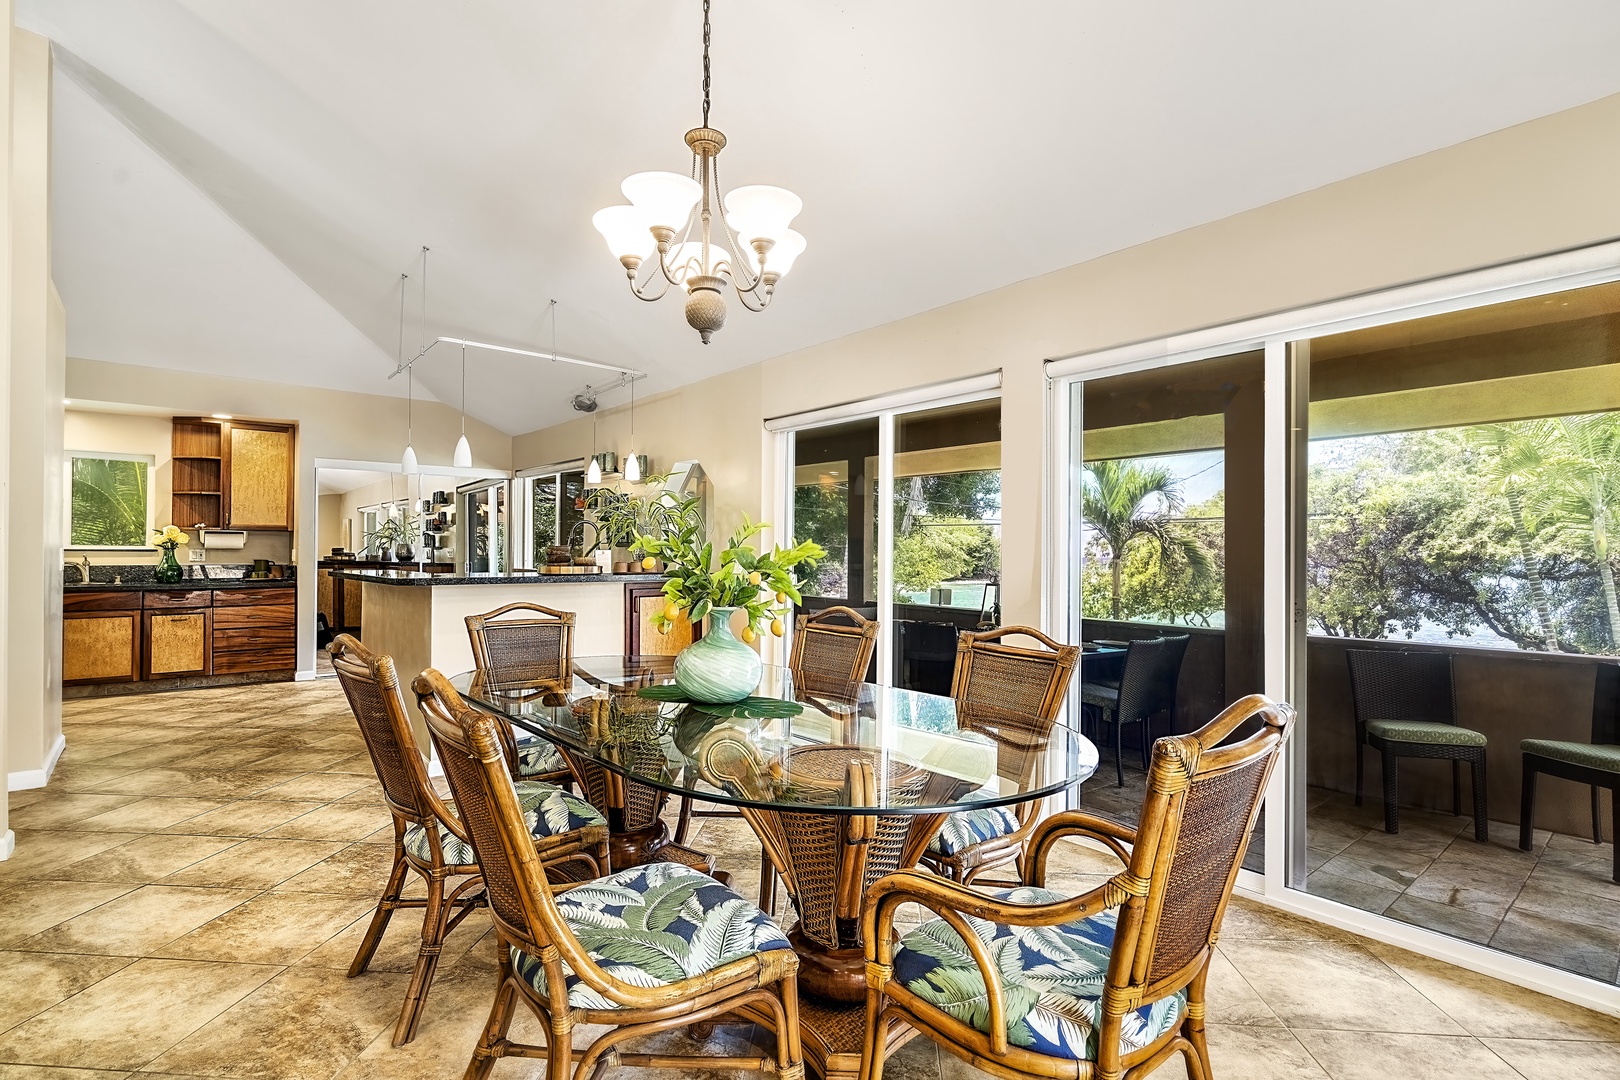 Kailua Kona Vacation Rentals, Lymans Bay Hale - Indoor dining area with A/C and tropical styling